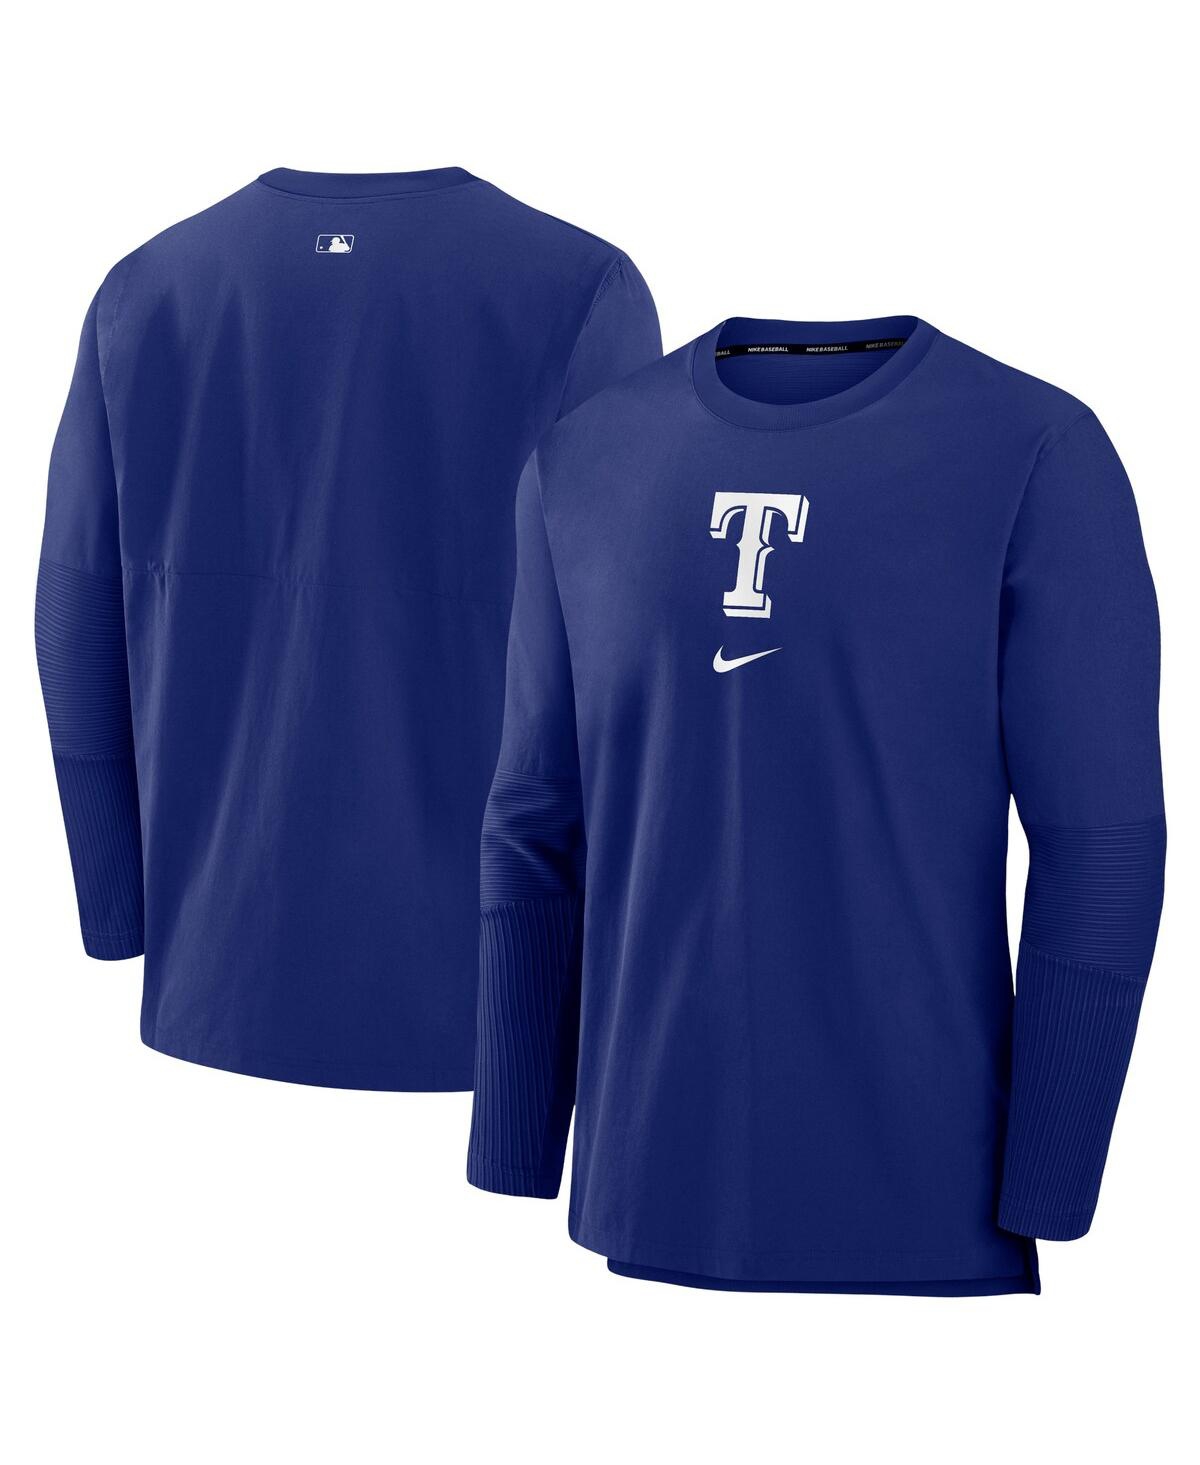 Men's Royal Texas Rangers Authentic Collection Player Performance Pullover Sweatshirt - Royal